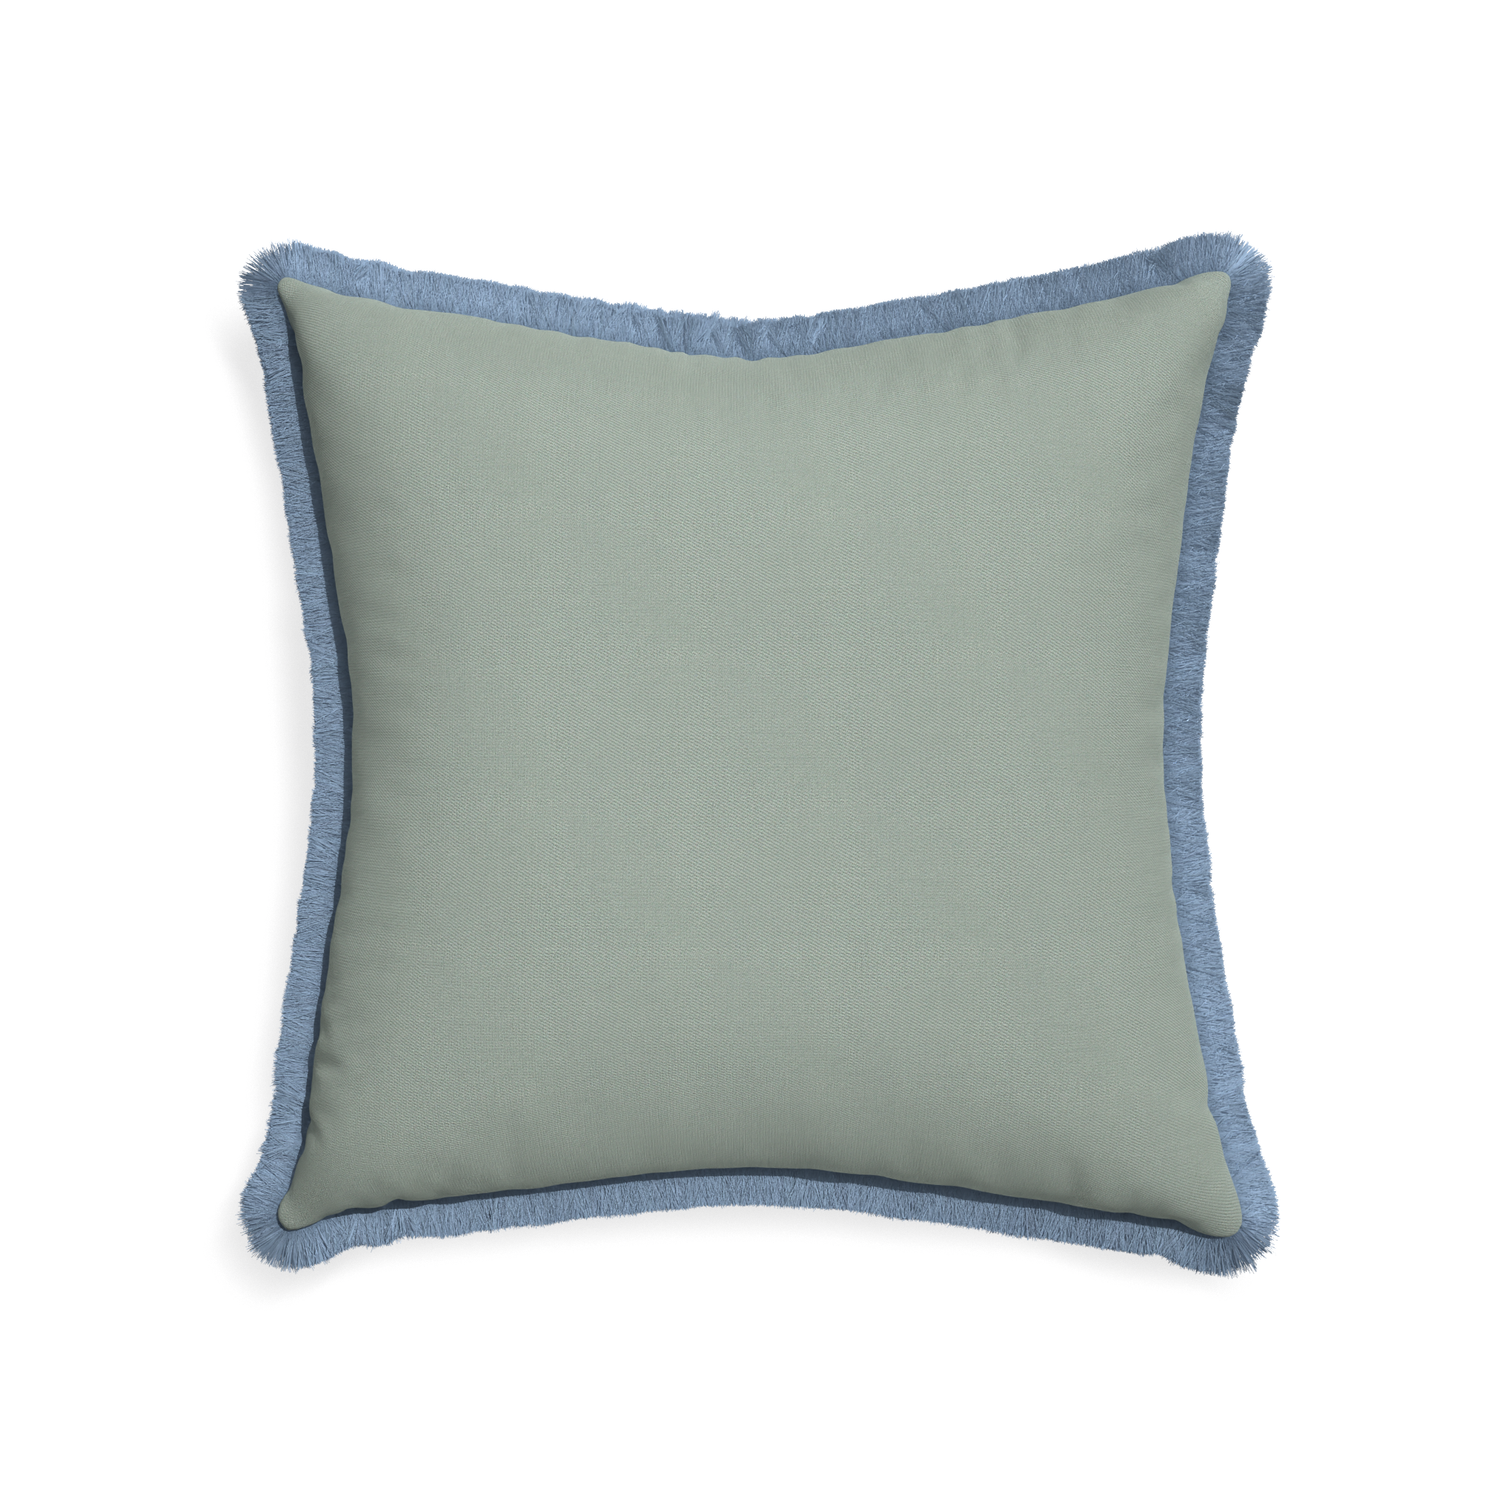 22-square sage custom sage green cottonpillow with sky fringe on white background